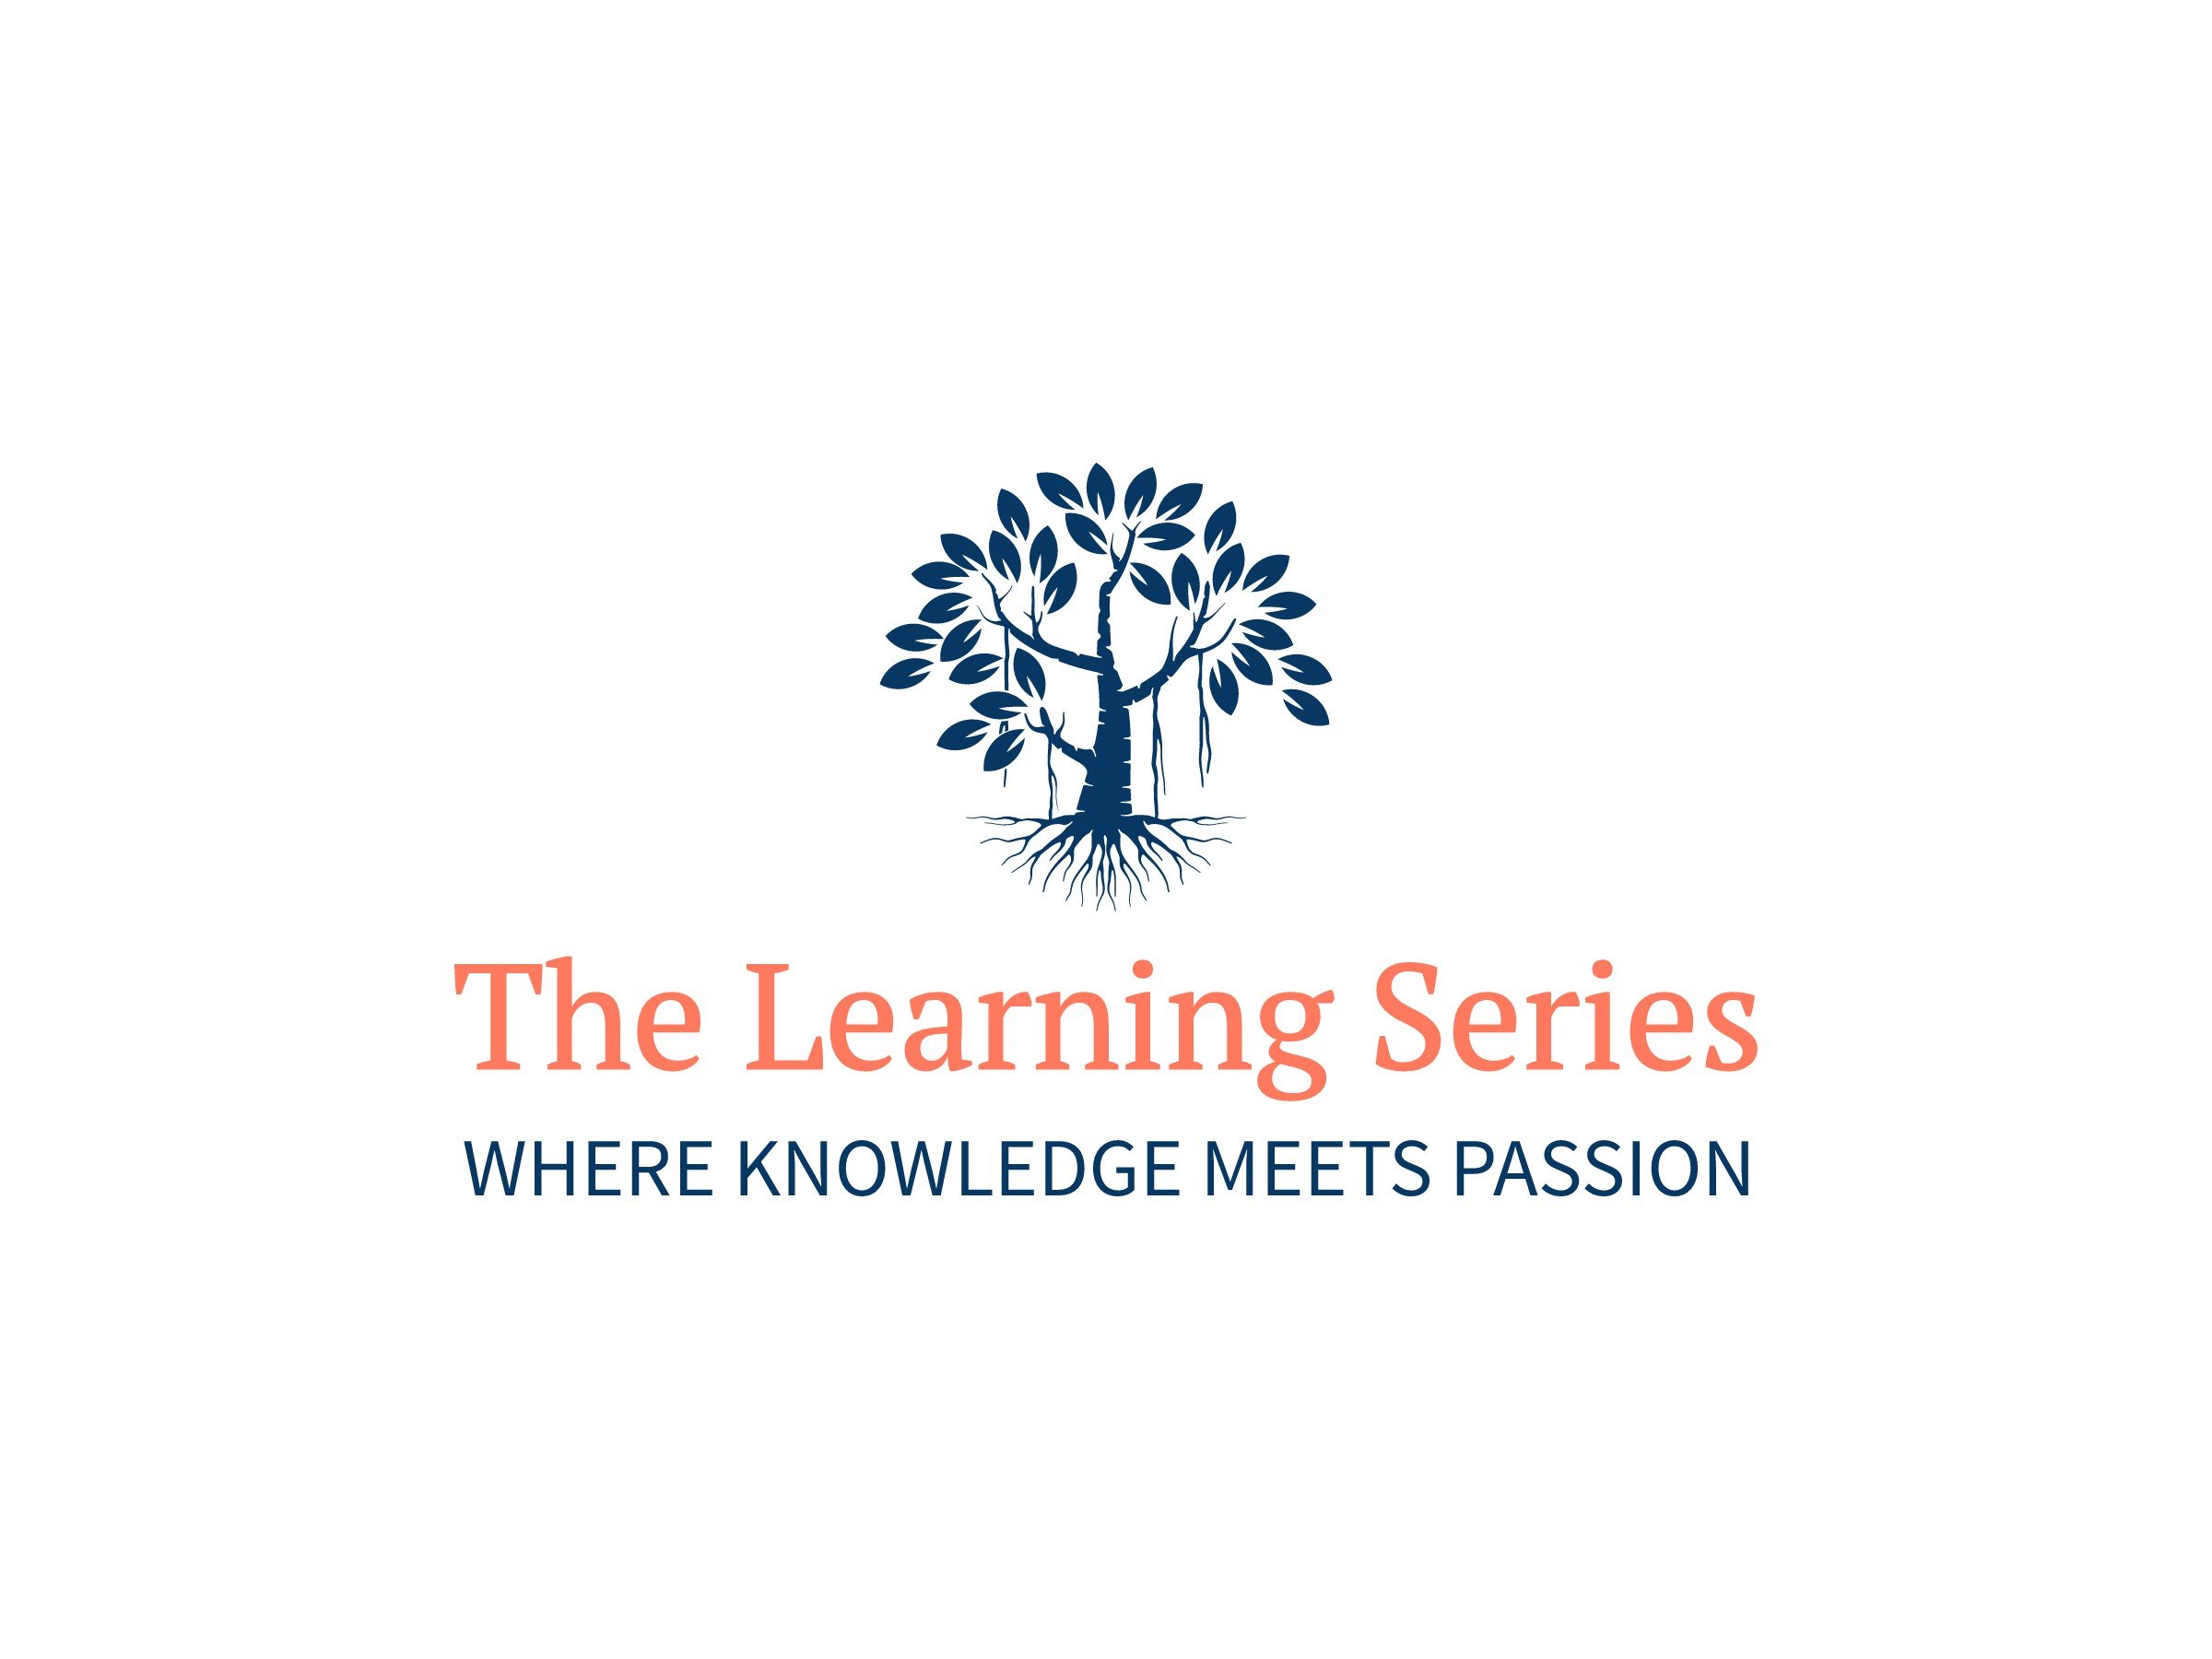 The Learning Series logo design